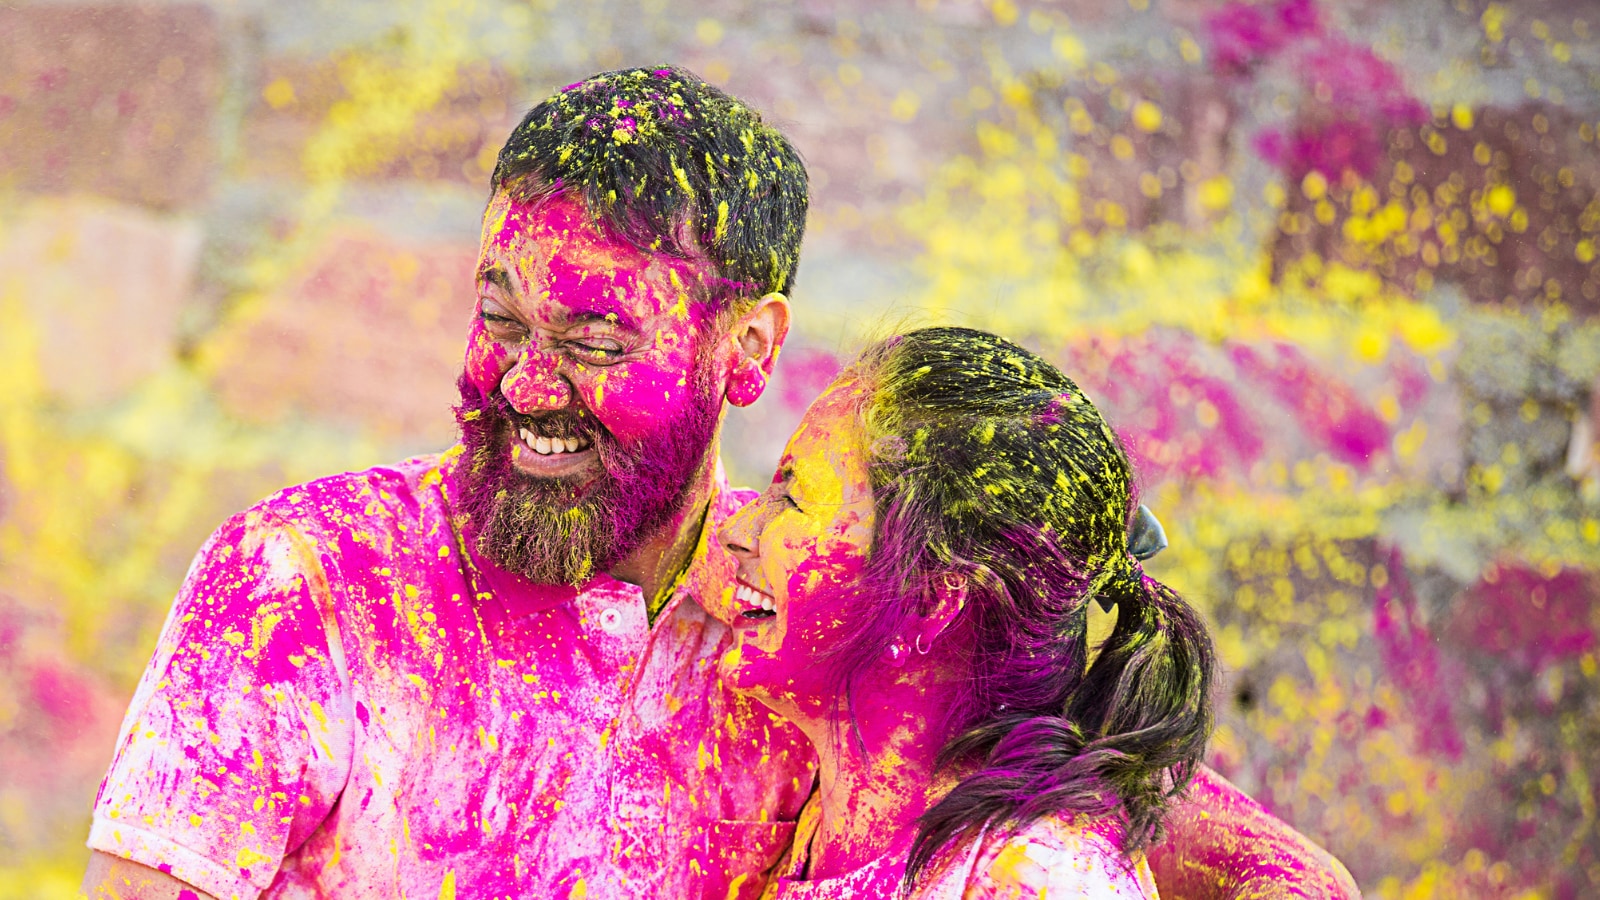 7 Romantic Ideas to Make This Holi More Colourful for Your Partner